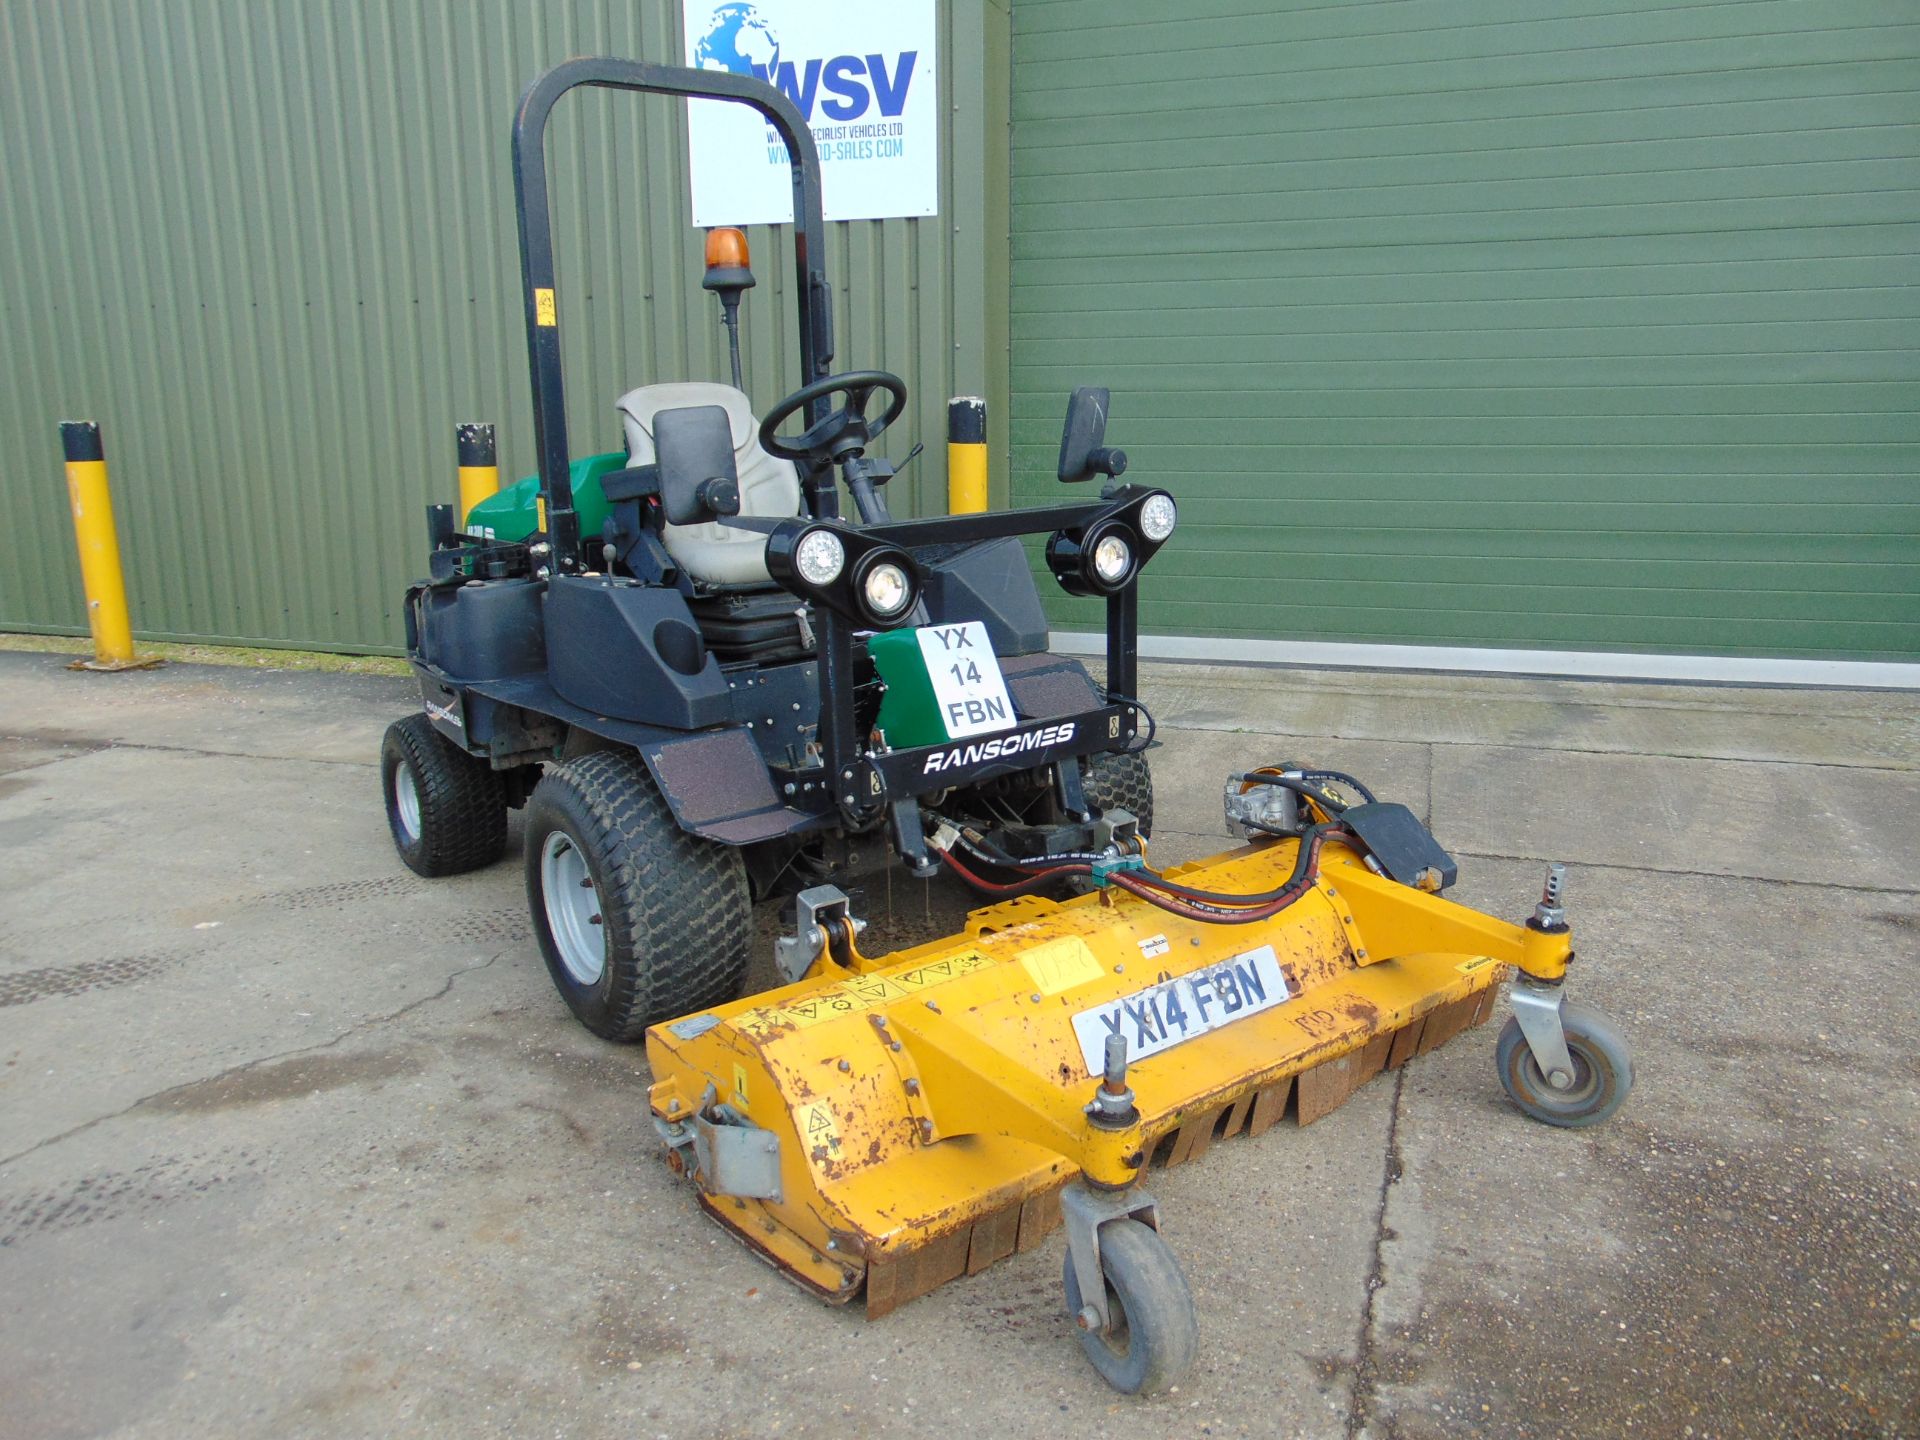 2014 Ransomes HR300 C/W Muthing Outfront Flail Mower ONLY 2,203 HOURS! - Image 2 of 26